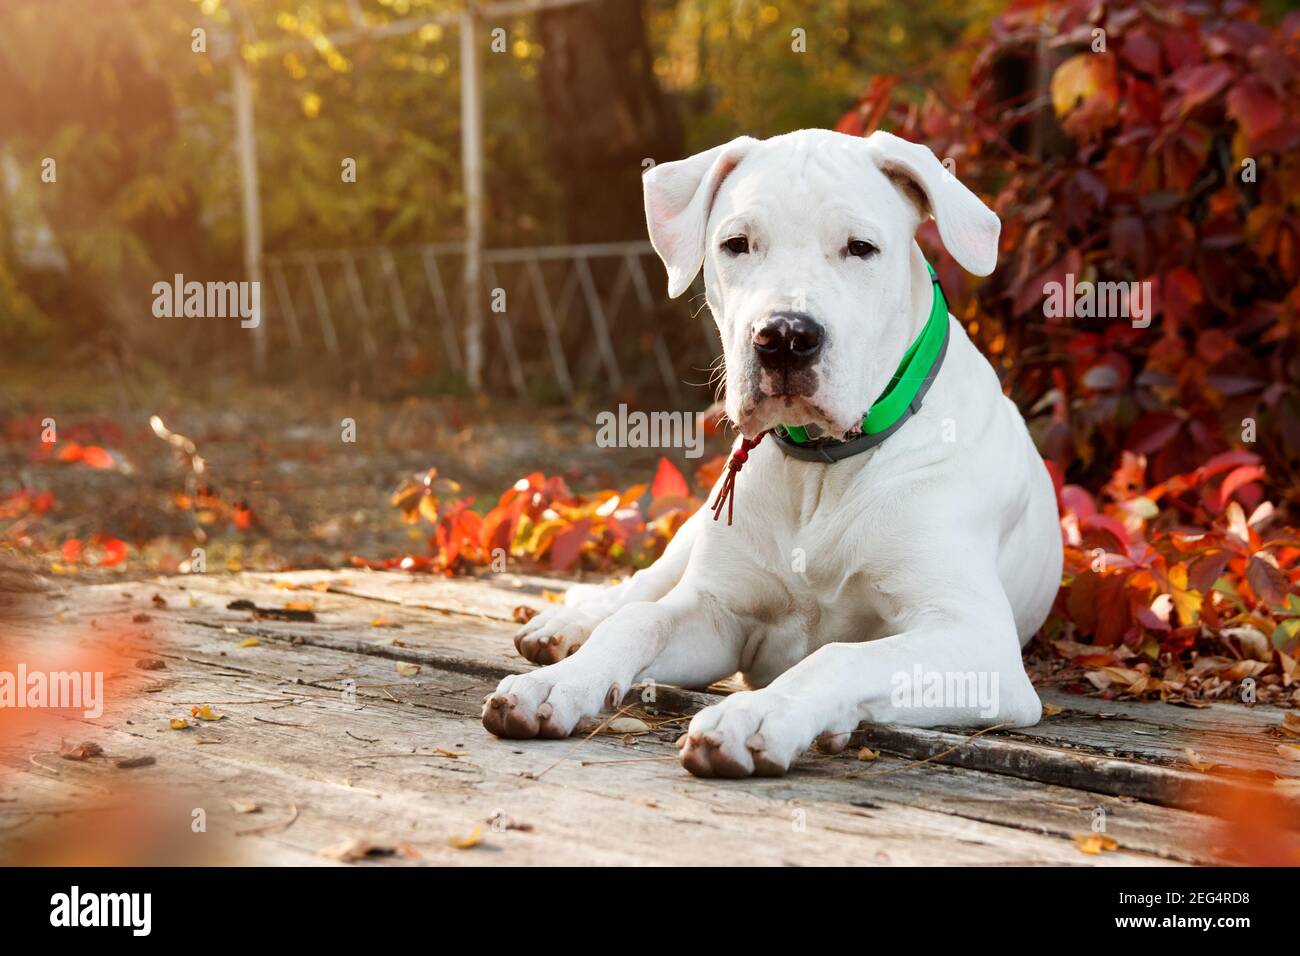 Dogo argentino lies and looking at the camera in autumn park near red leaves. Canine background Stock Photo